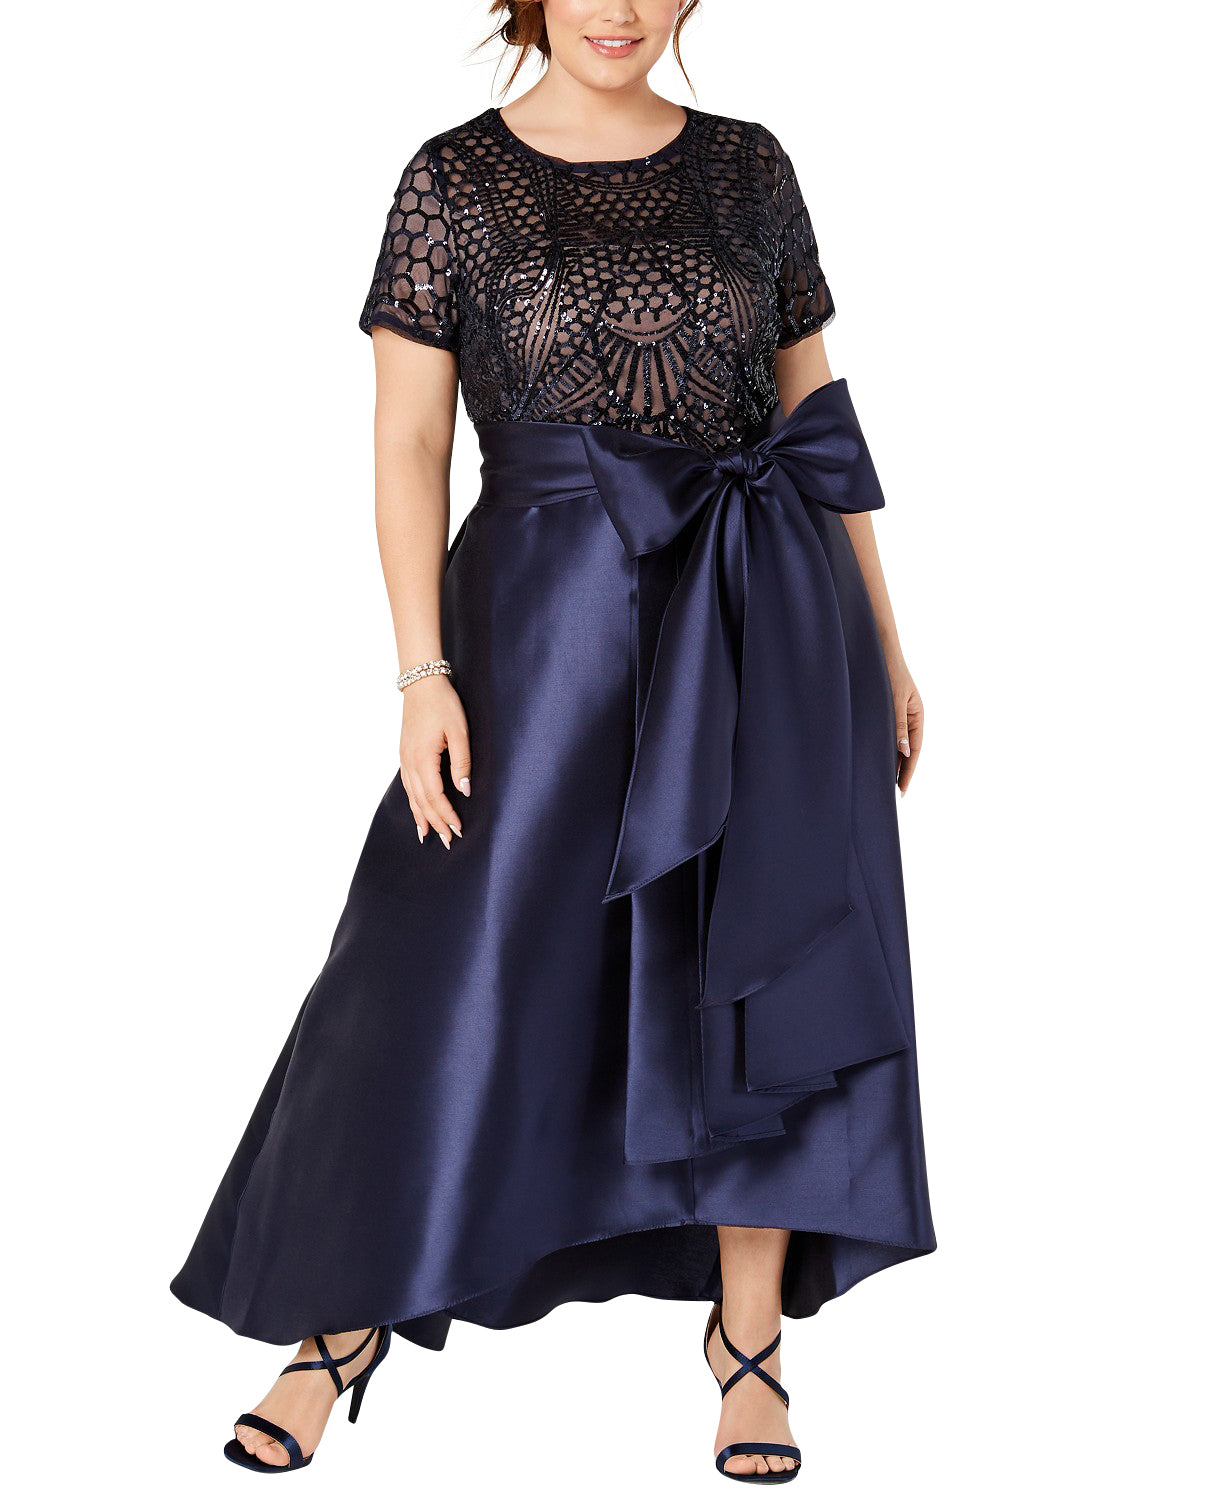 Women's Plus Size Short Sleeve Sequin-Embellished High-Low Gown - Mother of The Groom Dress